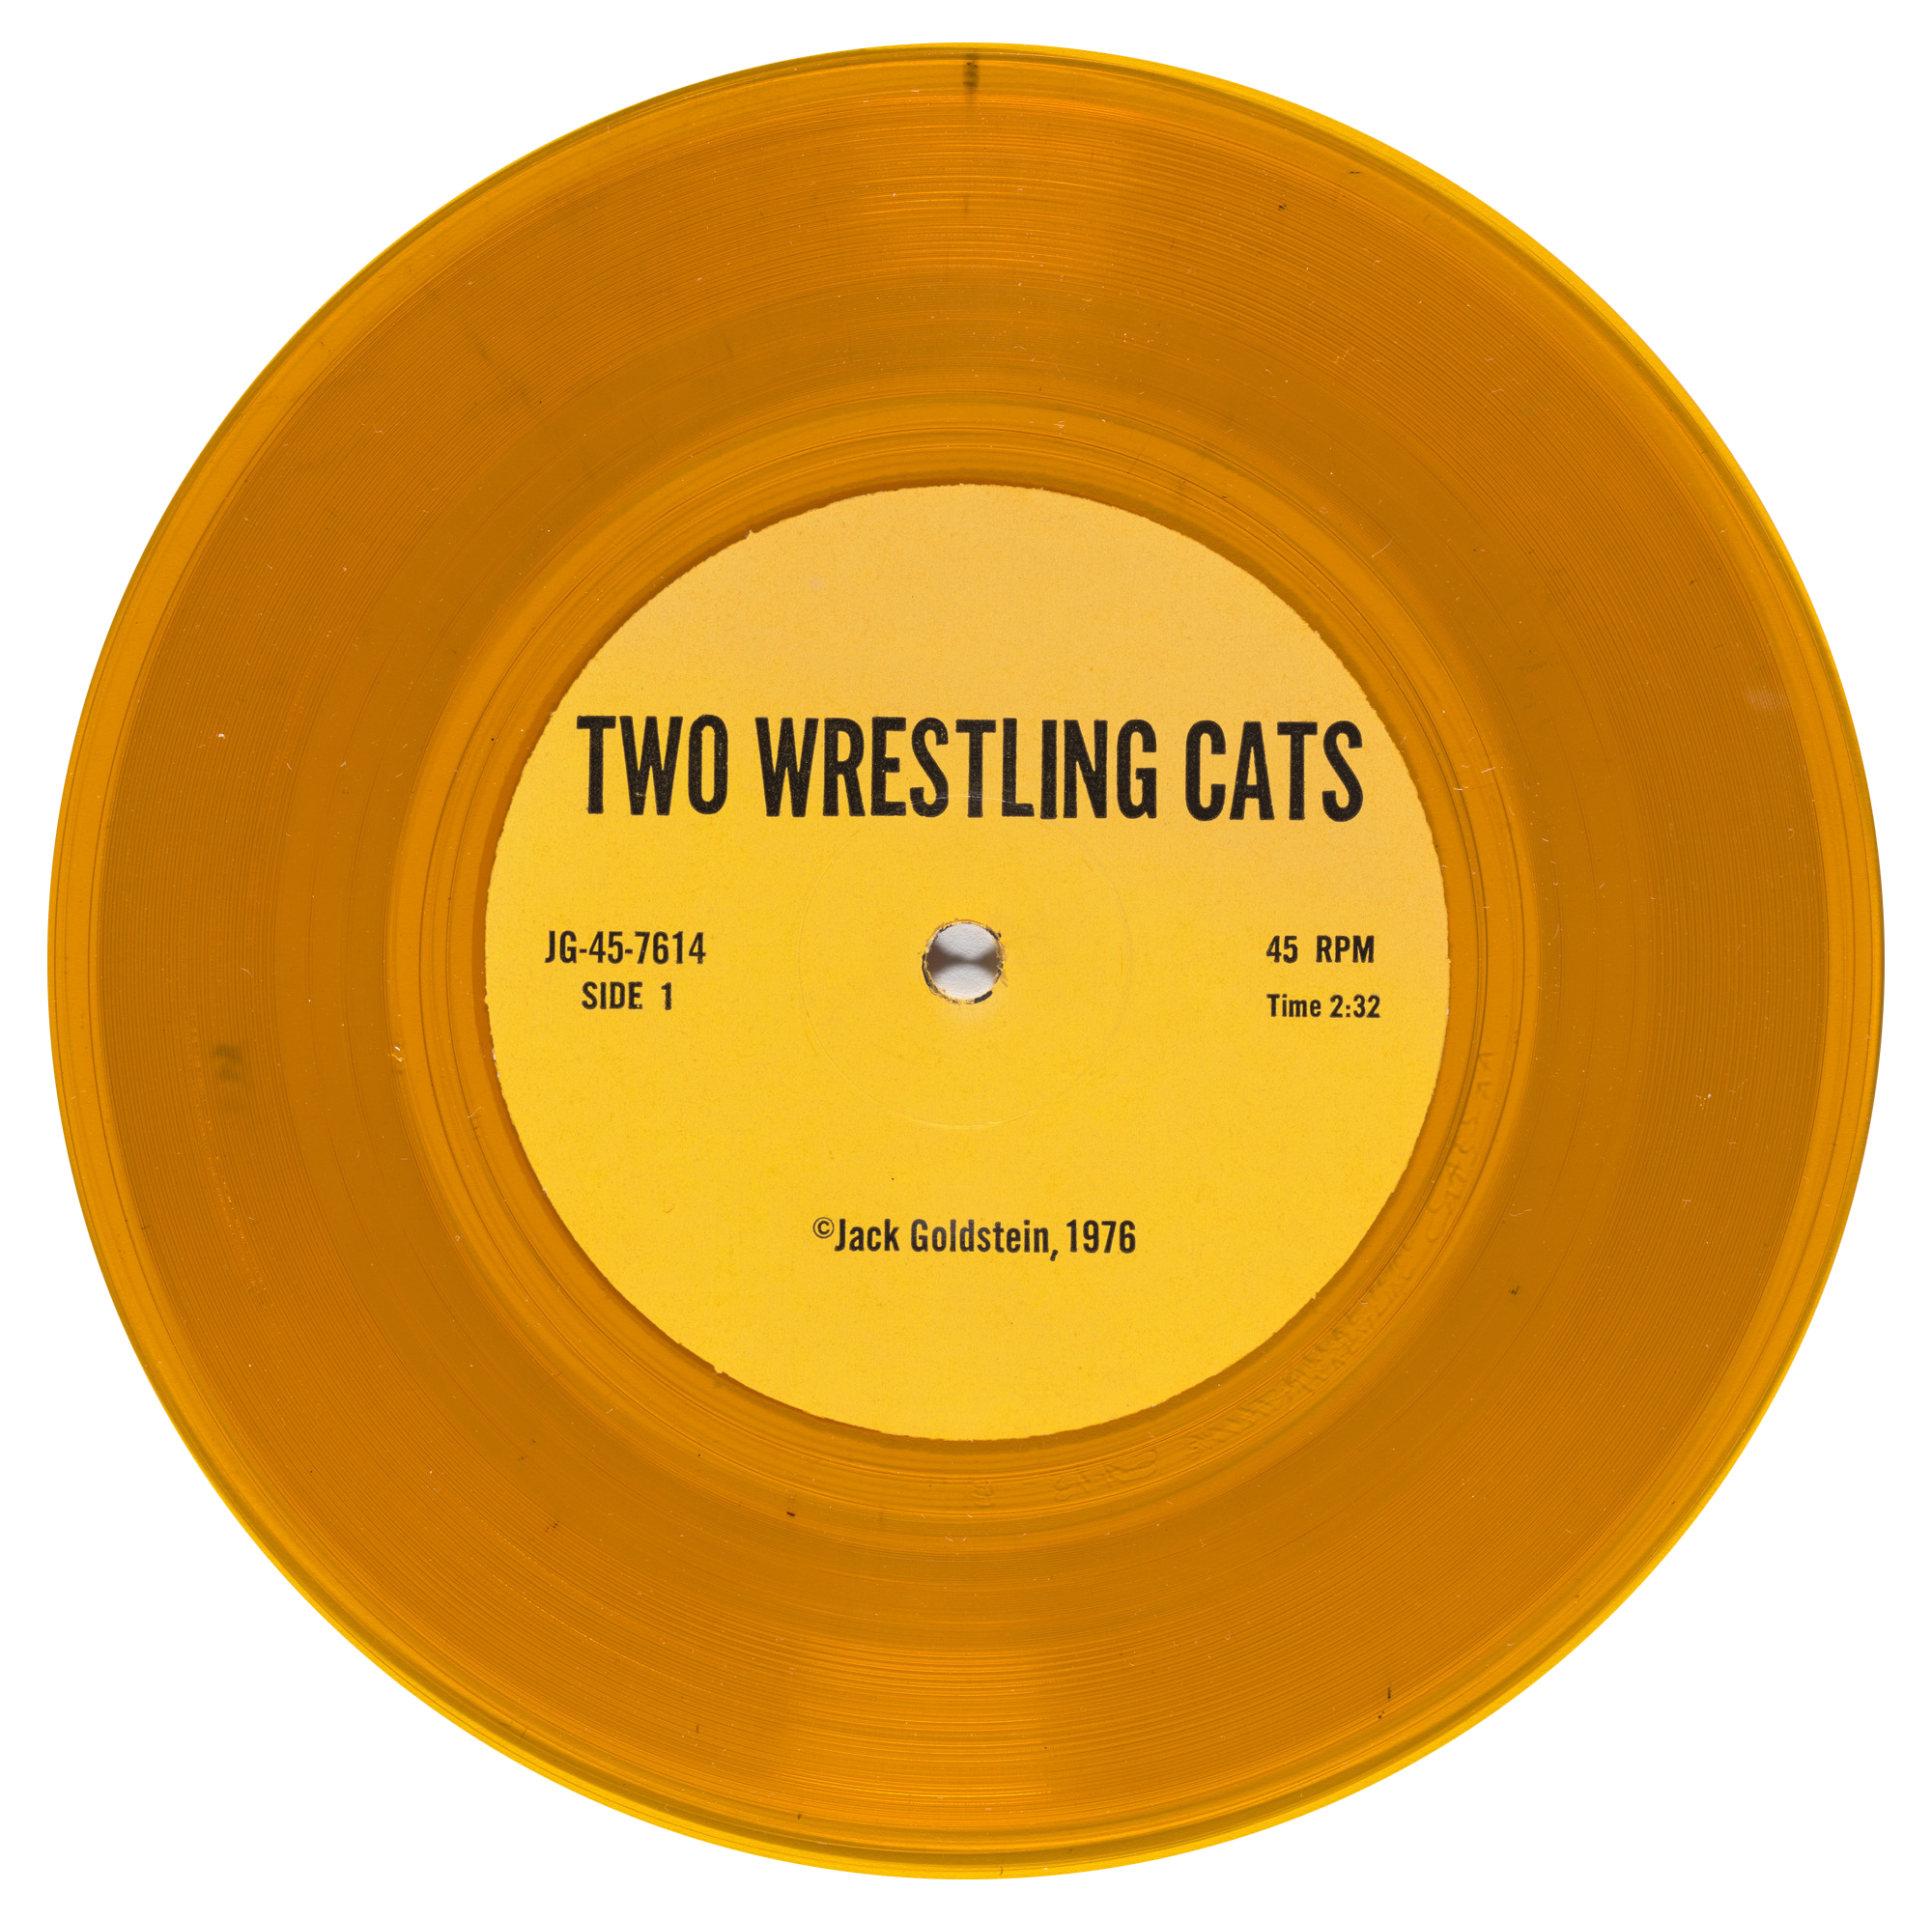  Two Wrestling Cats
Yellow vinyl - 45 rpm 7-inch record

Two Wrestling Cats is one of the nine components of :
A Suite of Nine 45 rpm 7-Inch Records with Sound Effects
1976